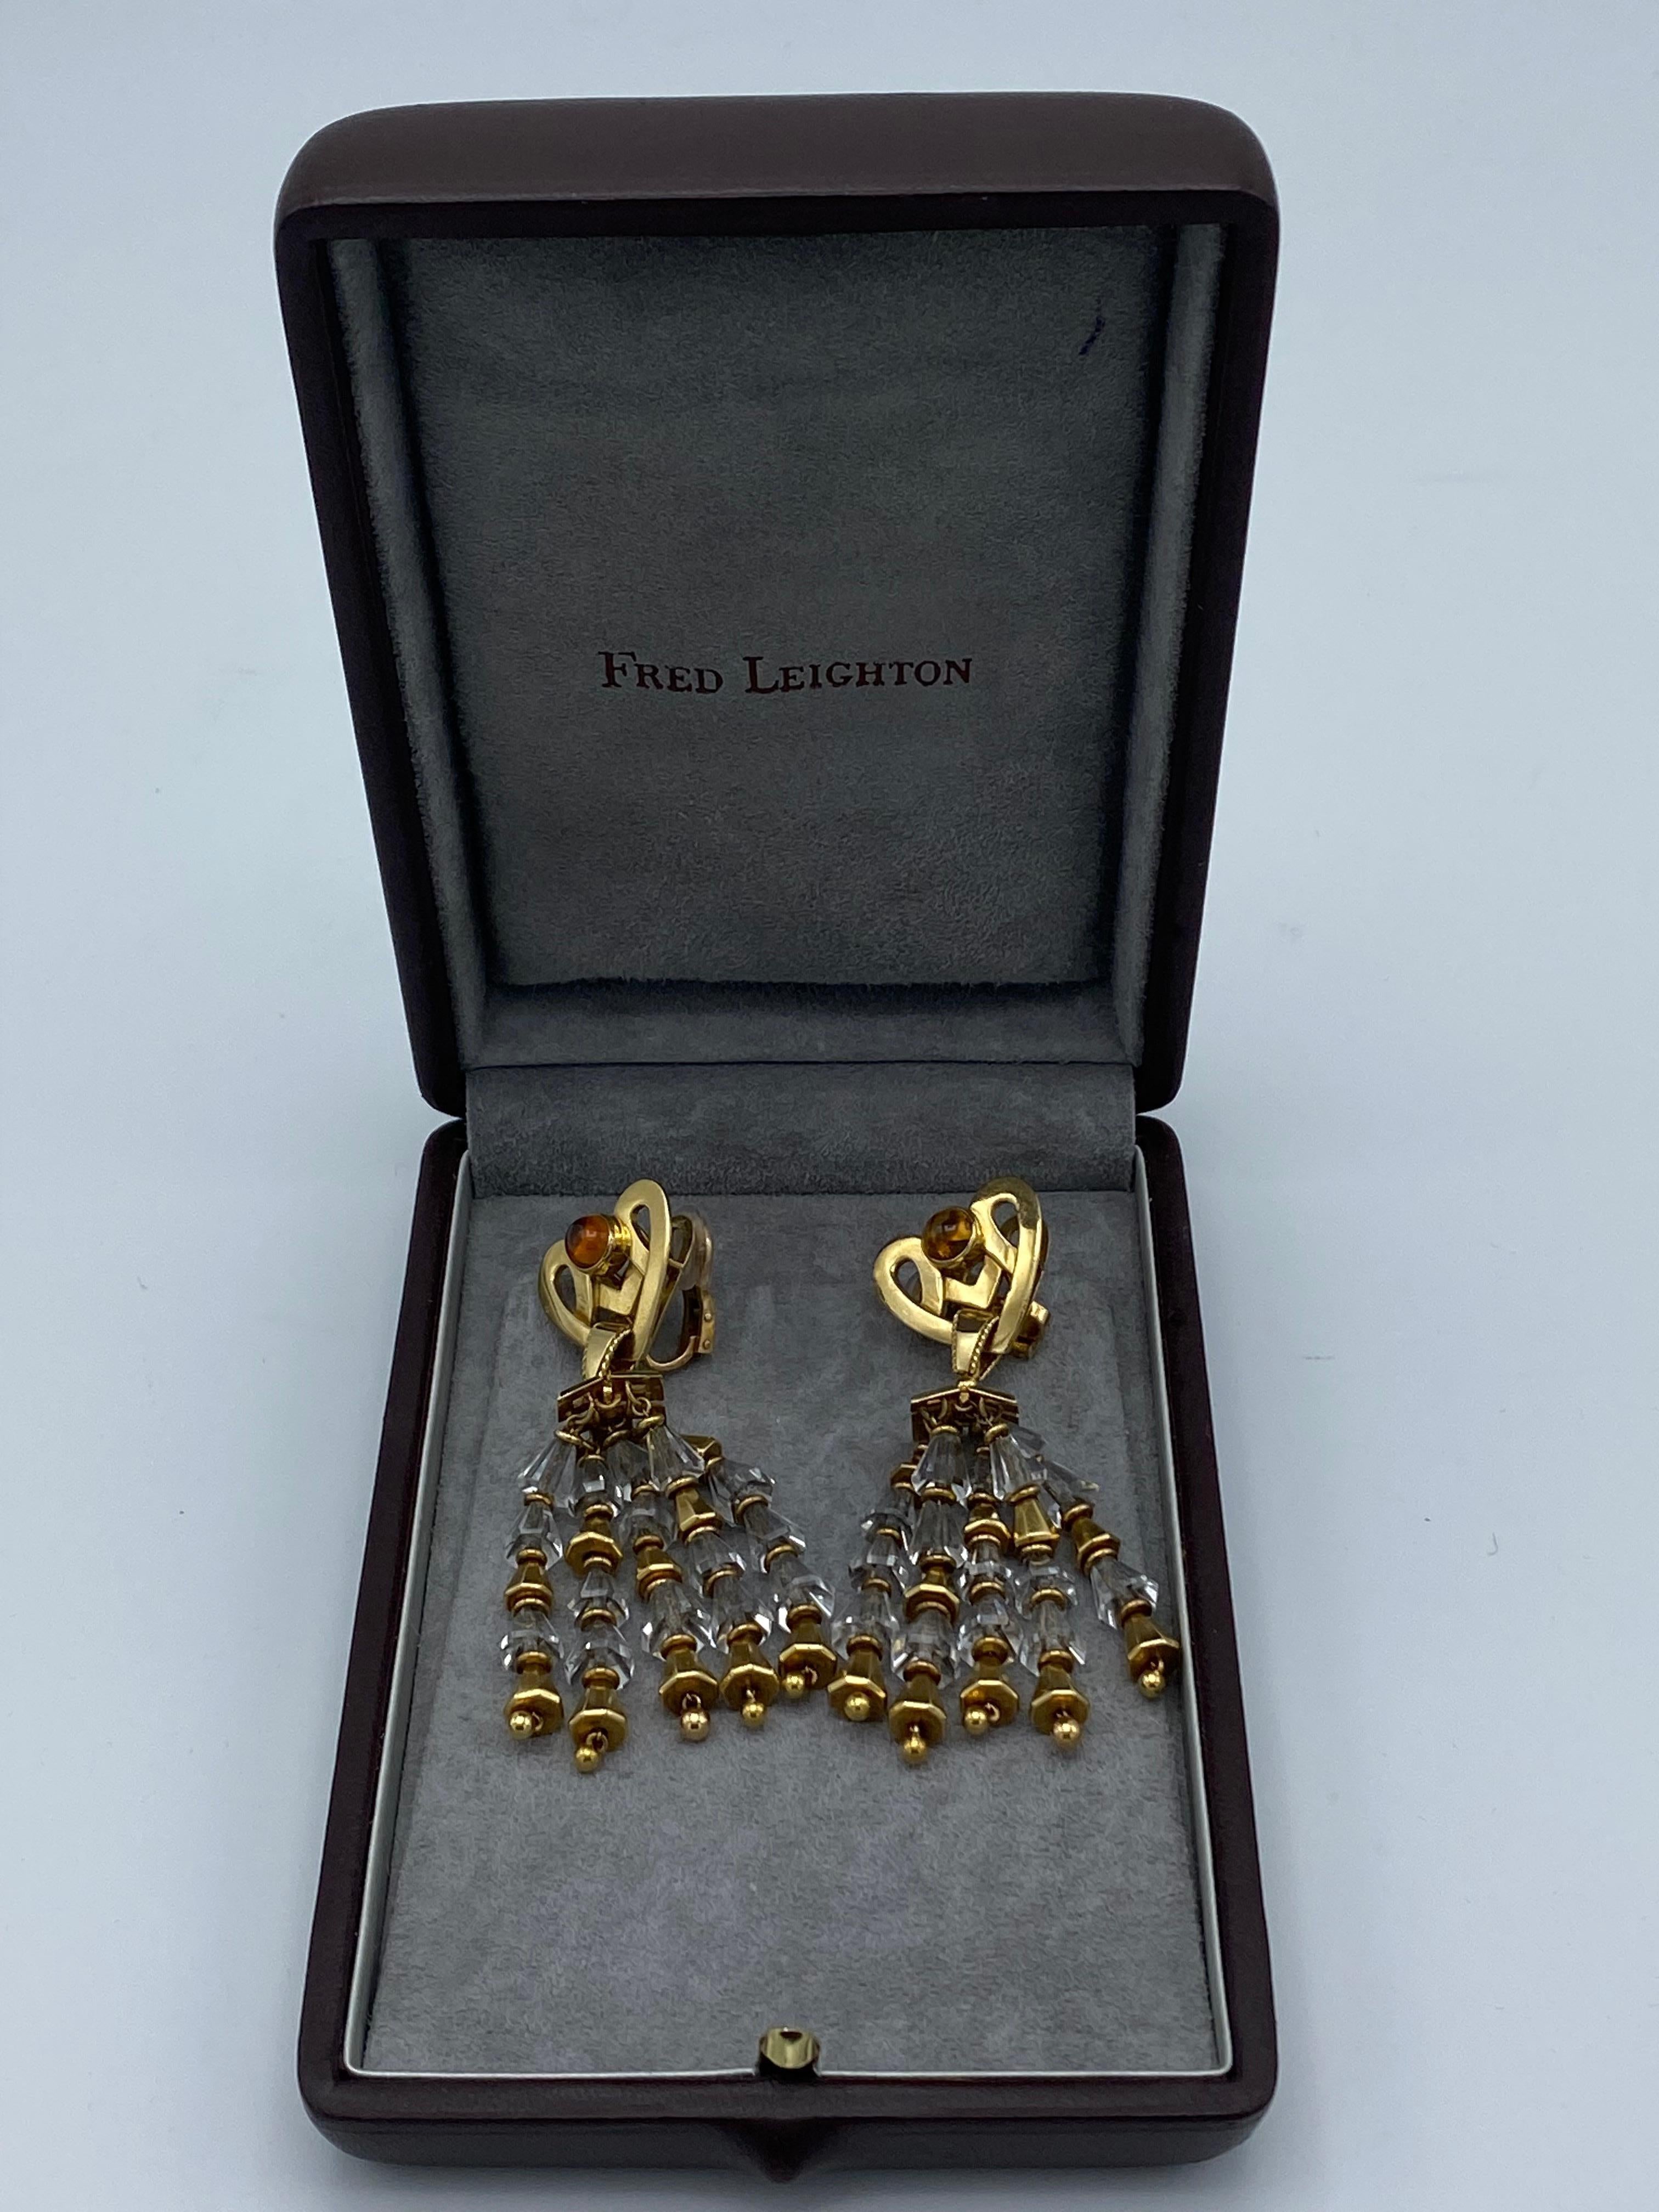 Product details:

The earrings are made out of 18 karat yellow gold, detailed with citrine and rock crystal, featuring heart motif and clip on style. Made in France.

